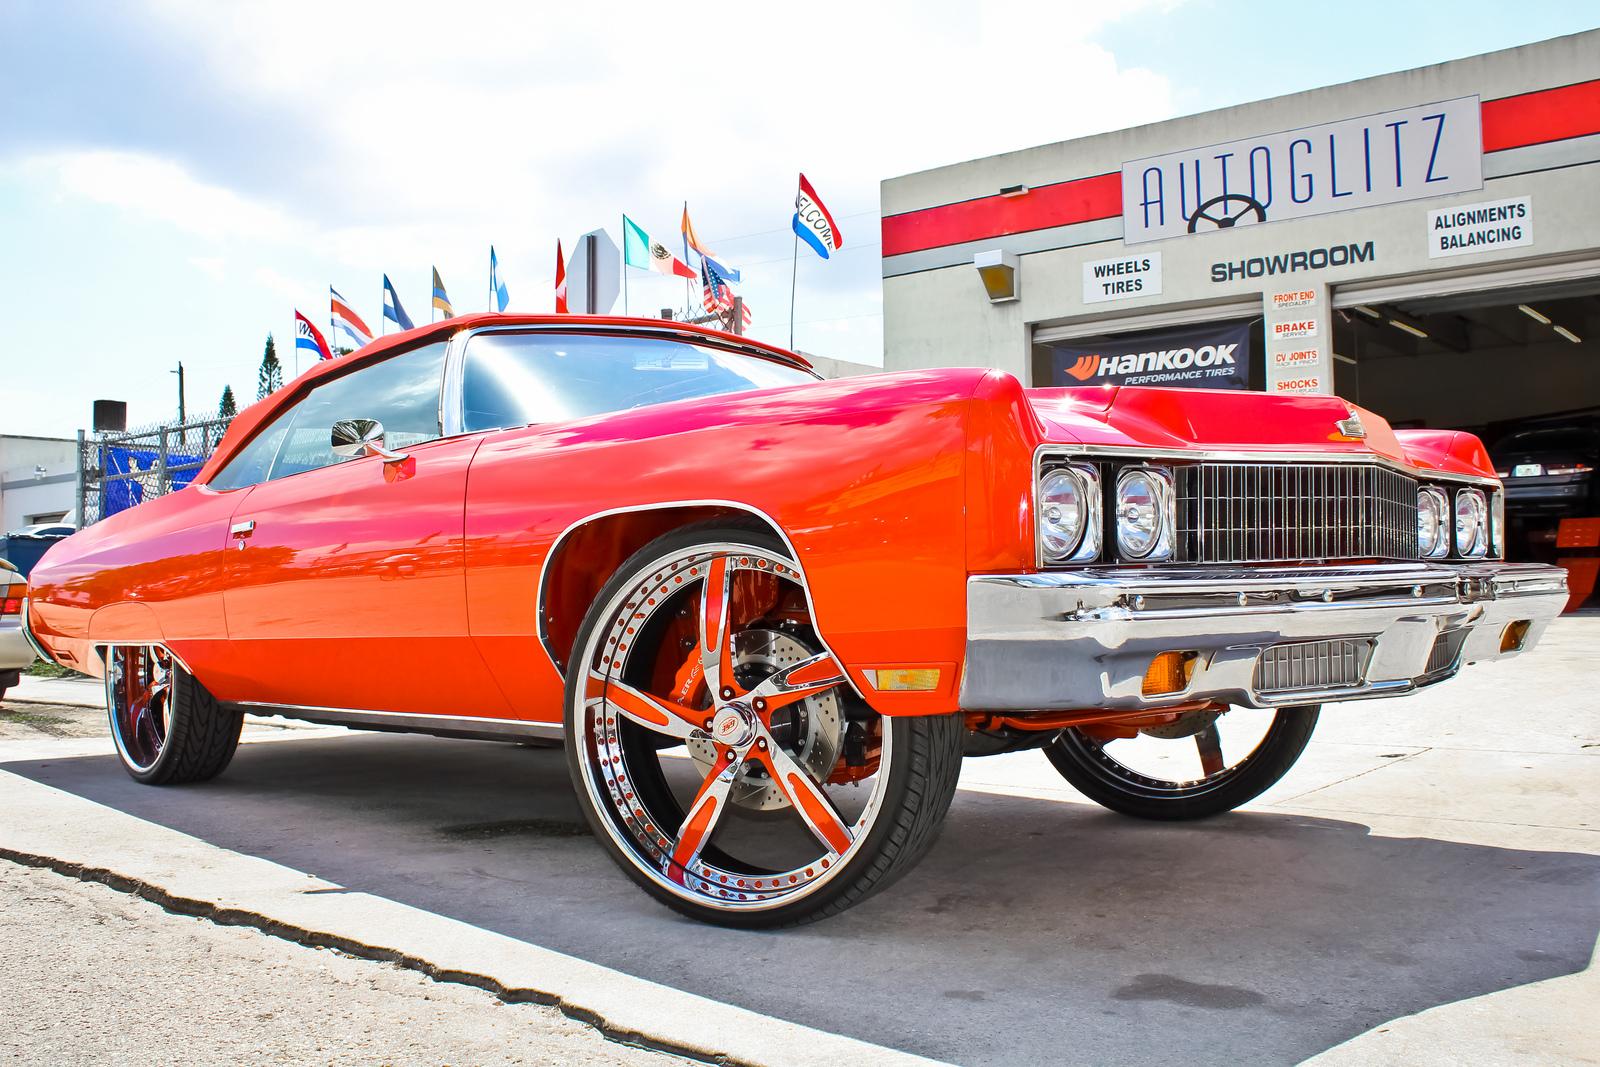 The Donk: Putting Huge Wheels on a Car